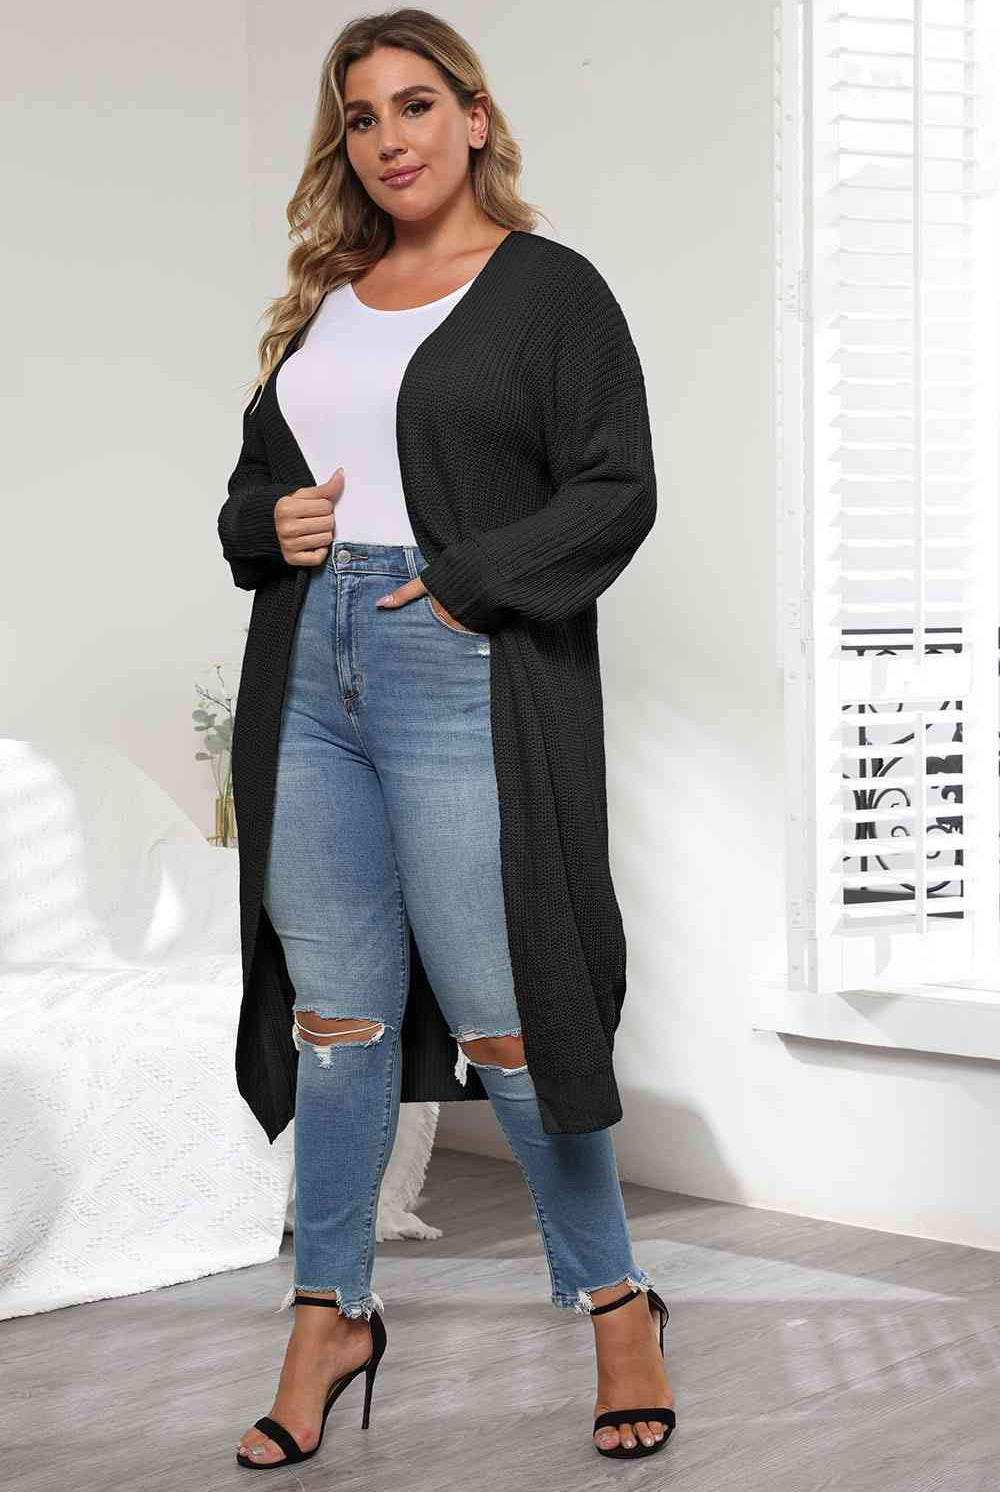 Light Gray Plus Size Open Front Long Sleeve Cardigan Plus Size Clothes